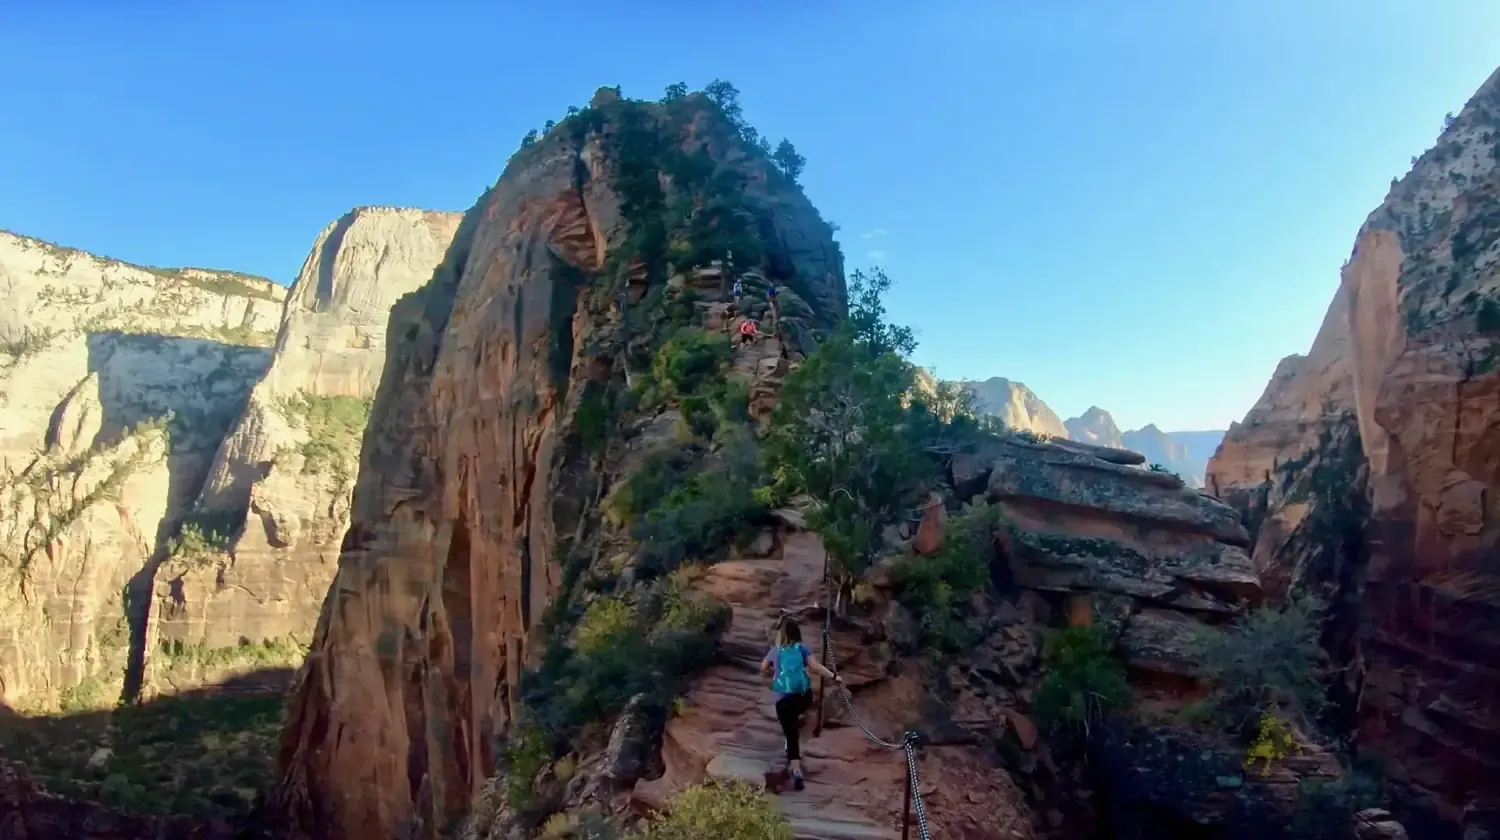 Lindsey is traversing the precarious chain section of the Angels Landing hike